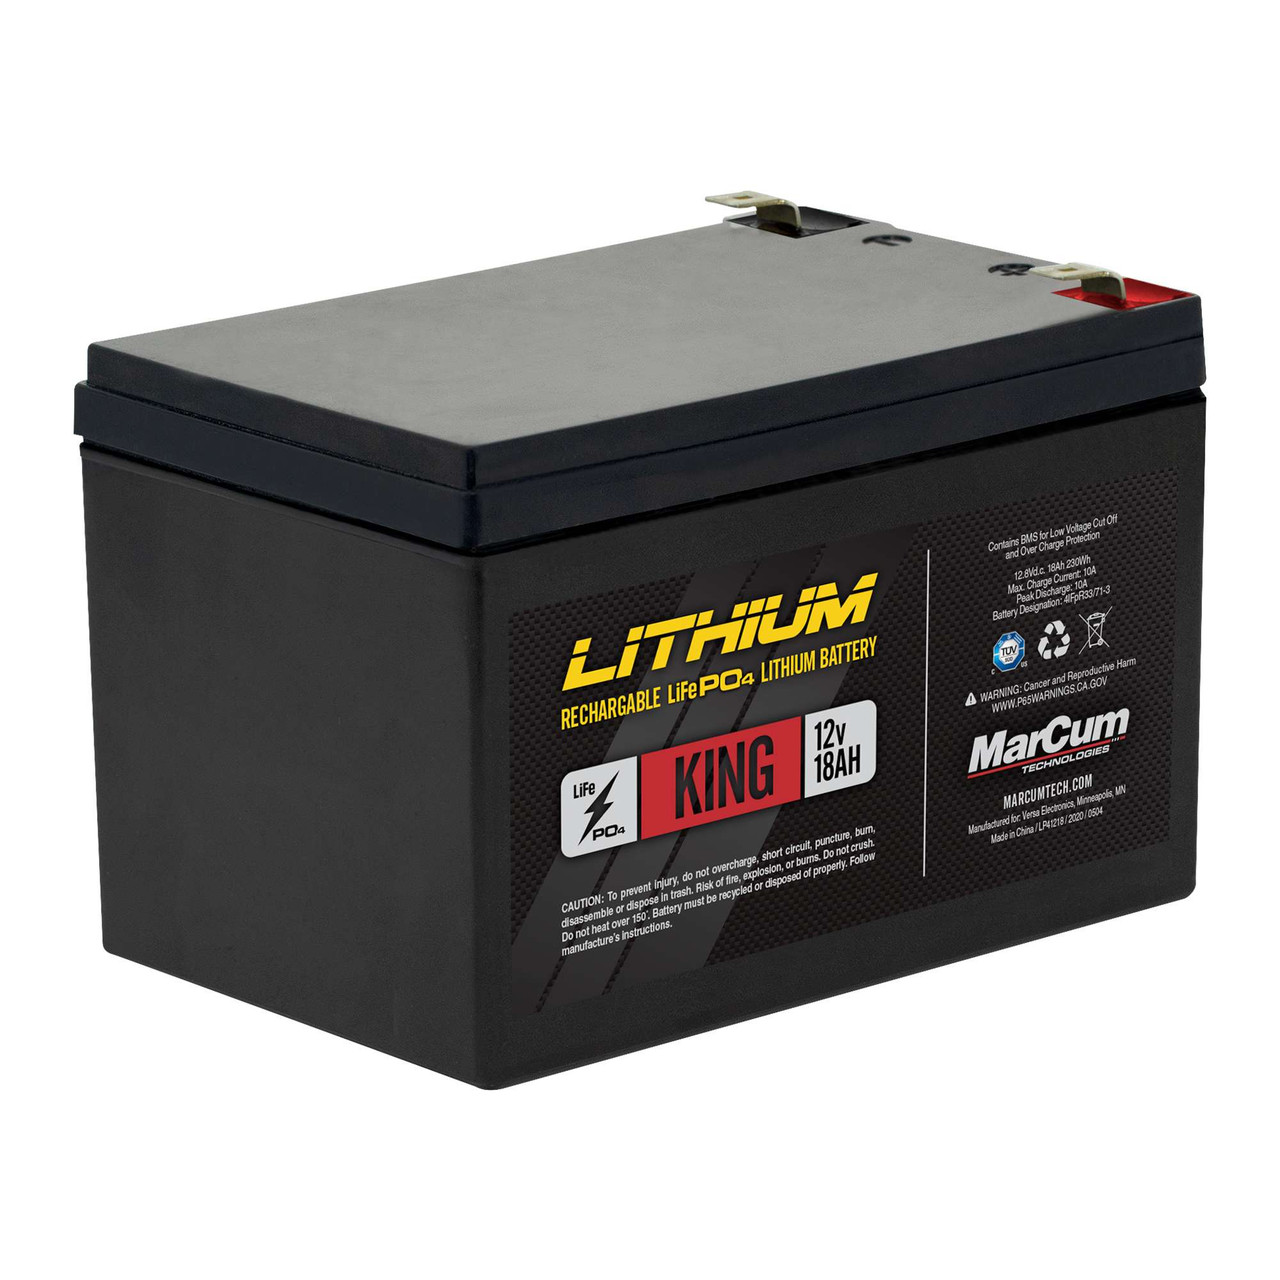 Marcum LITHIUM KING 12V 18AH LiFePO4 Battery Kit With Charger